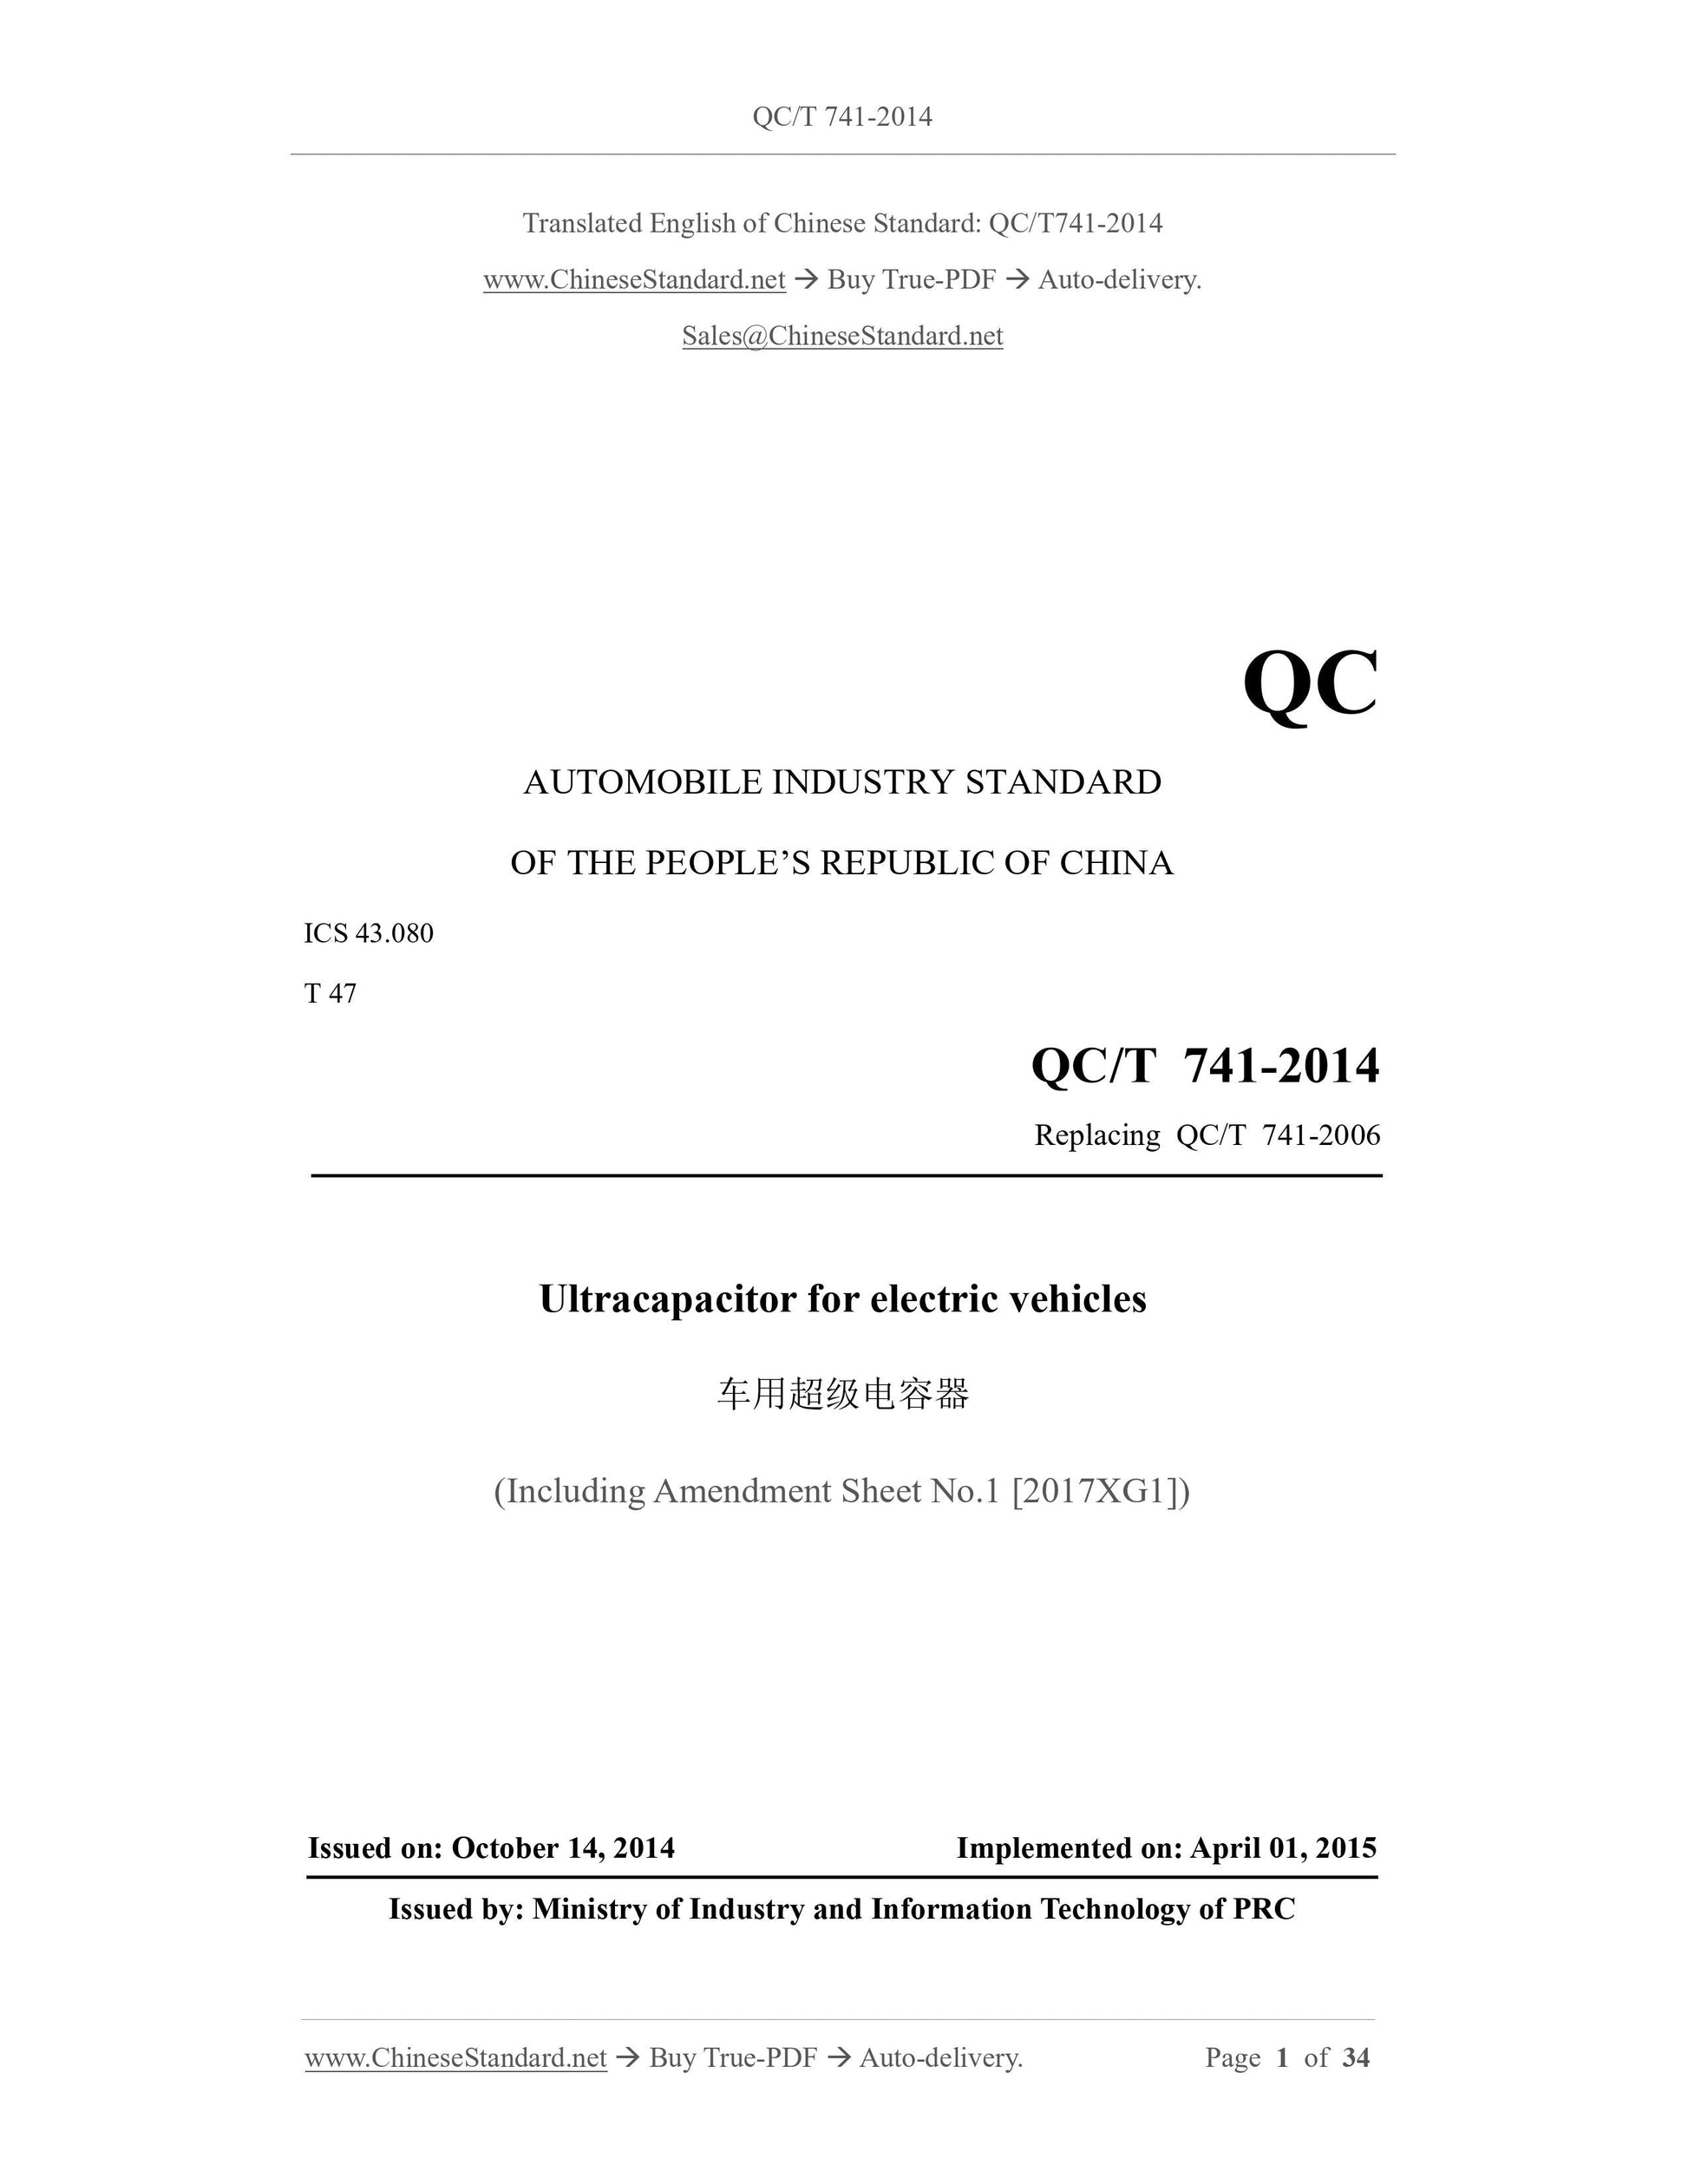 QC/T 741-2014 Page 1